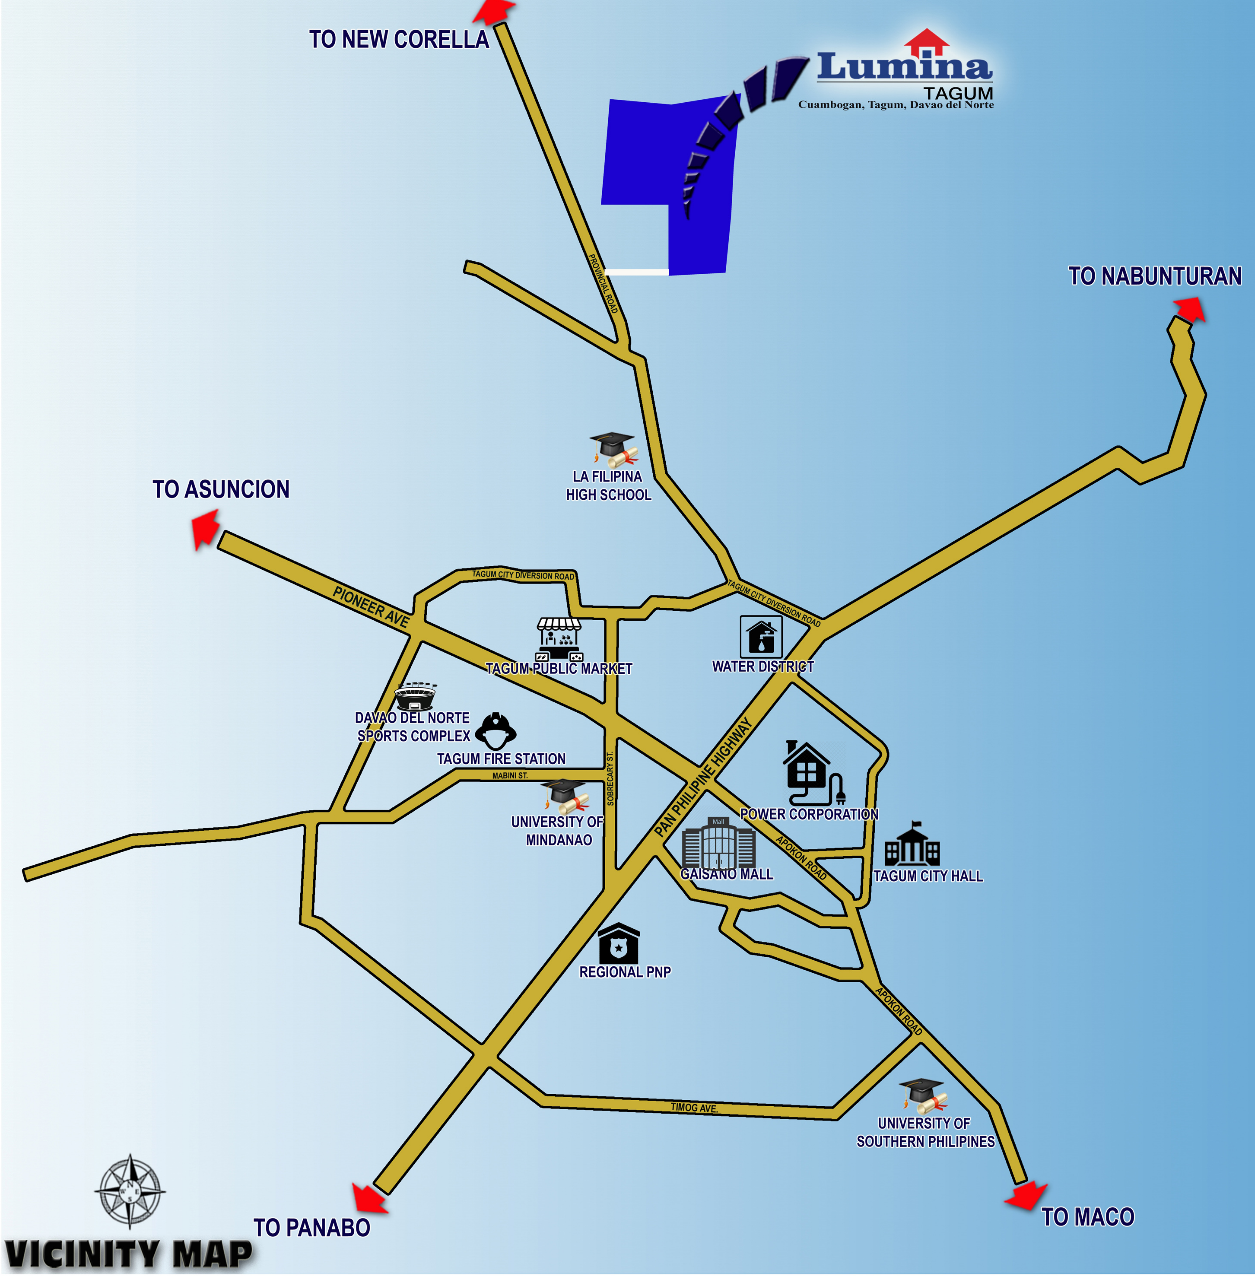 VICINITY-MAP-1642492788.png